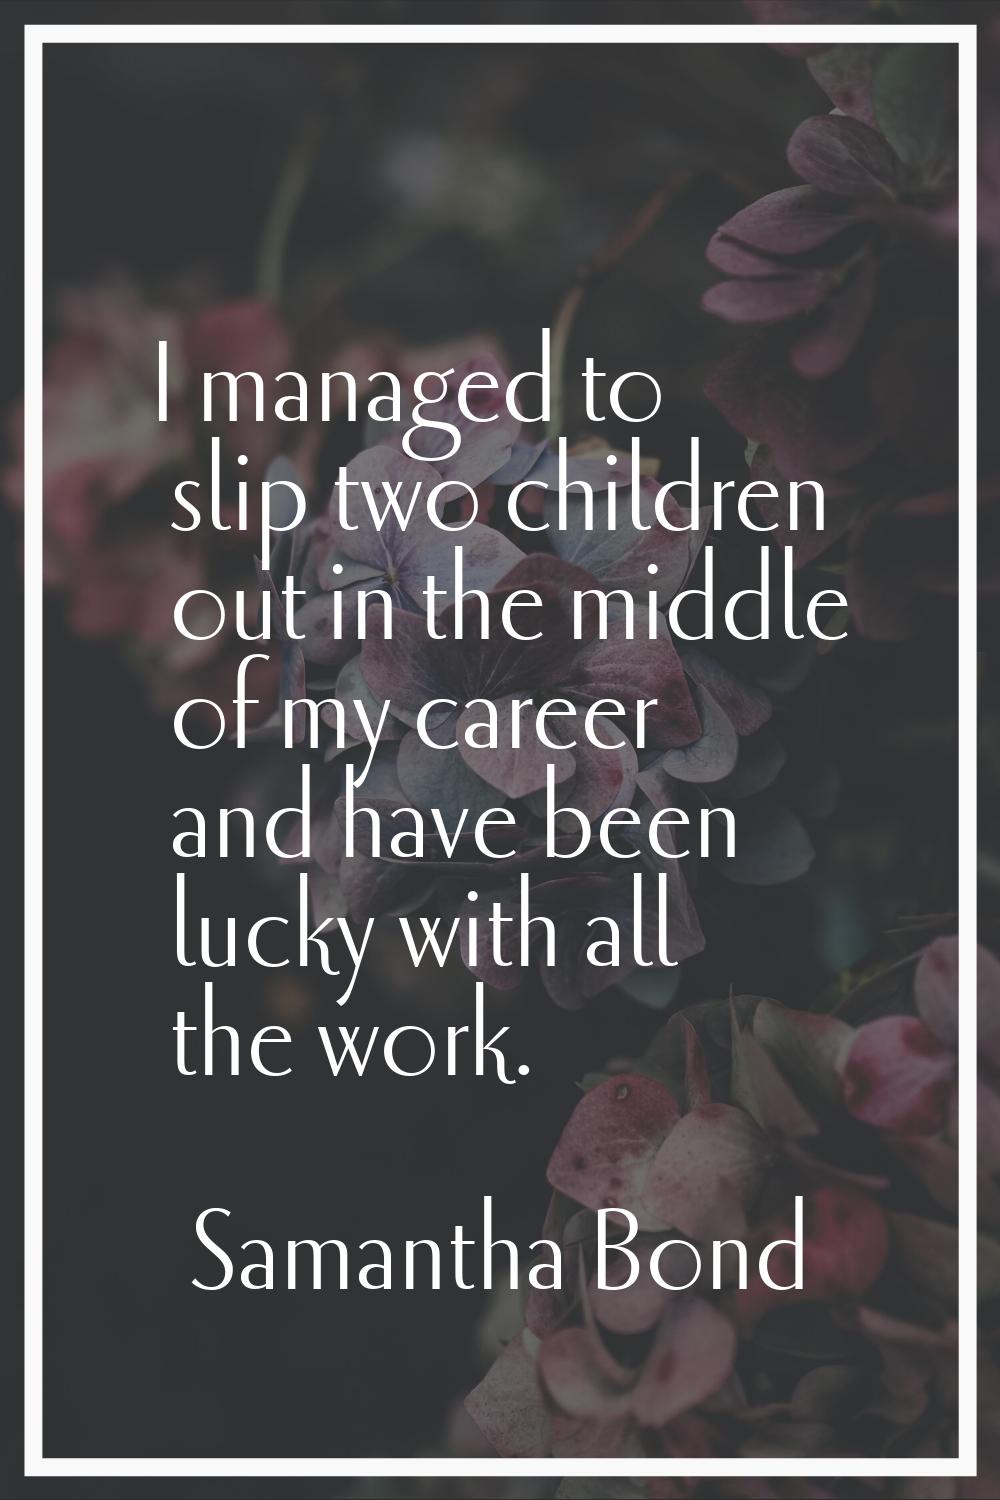 I managed to slip two children out in the middle of my career and have been lucky with all the work